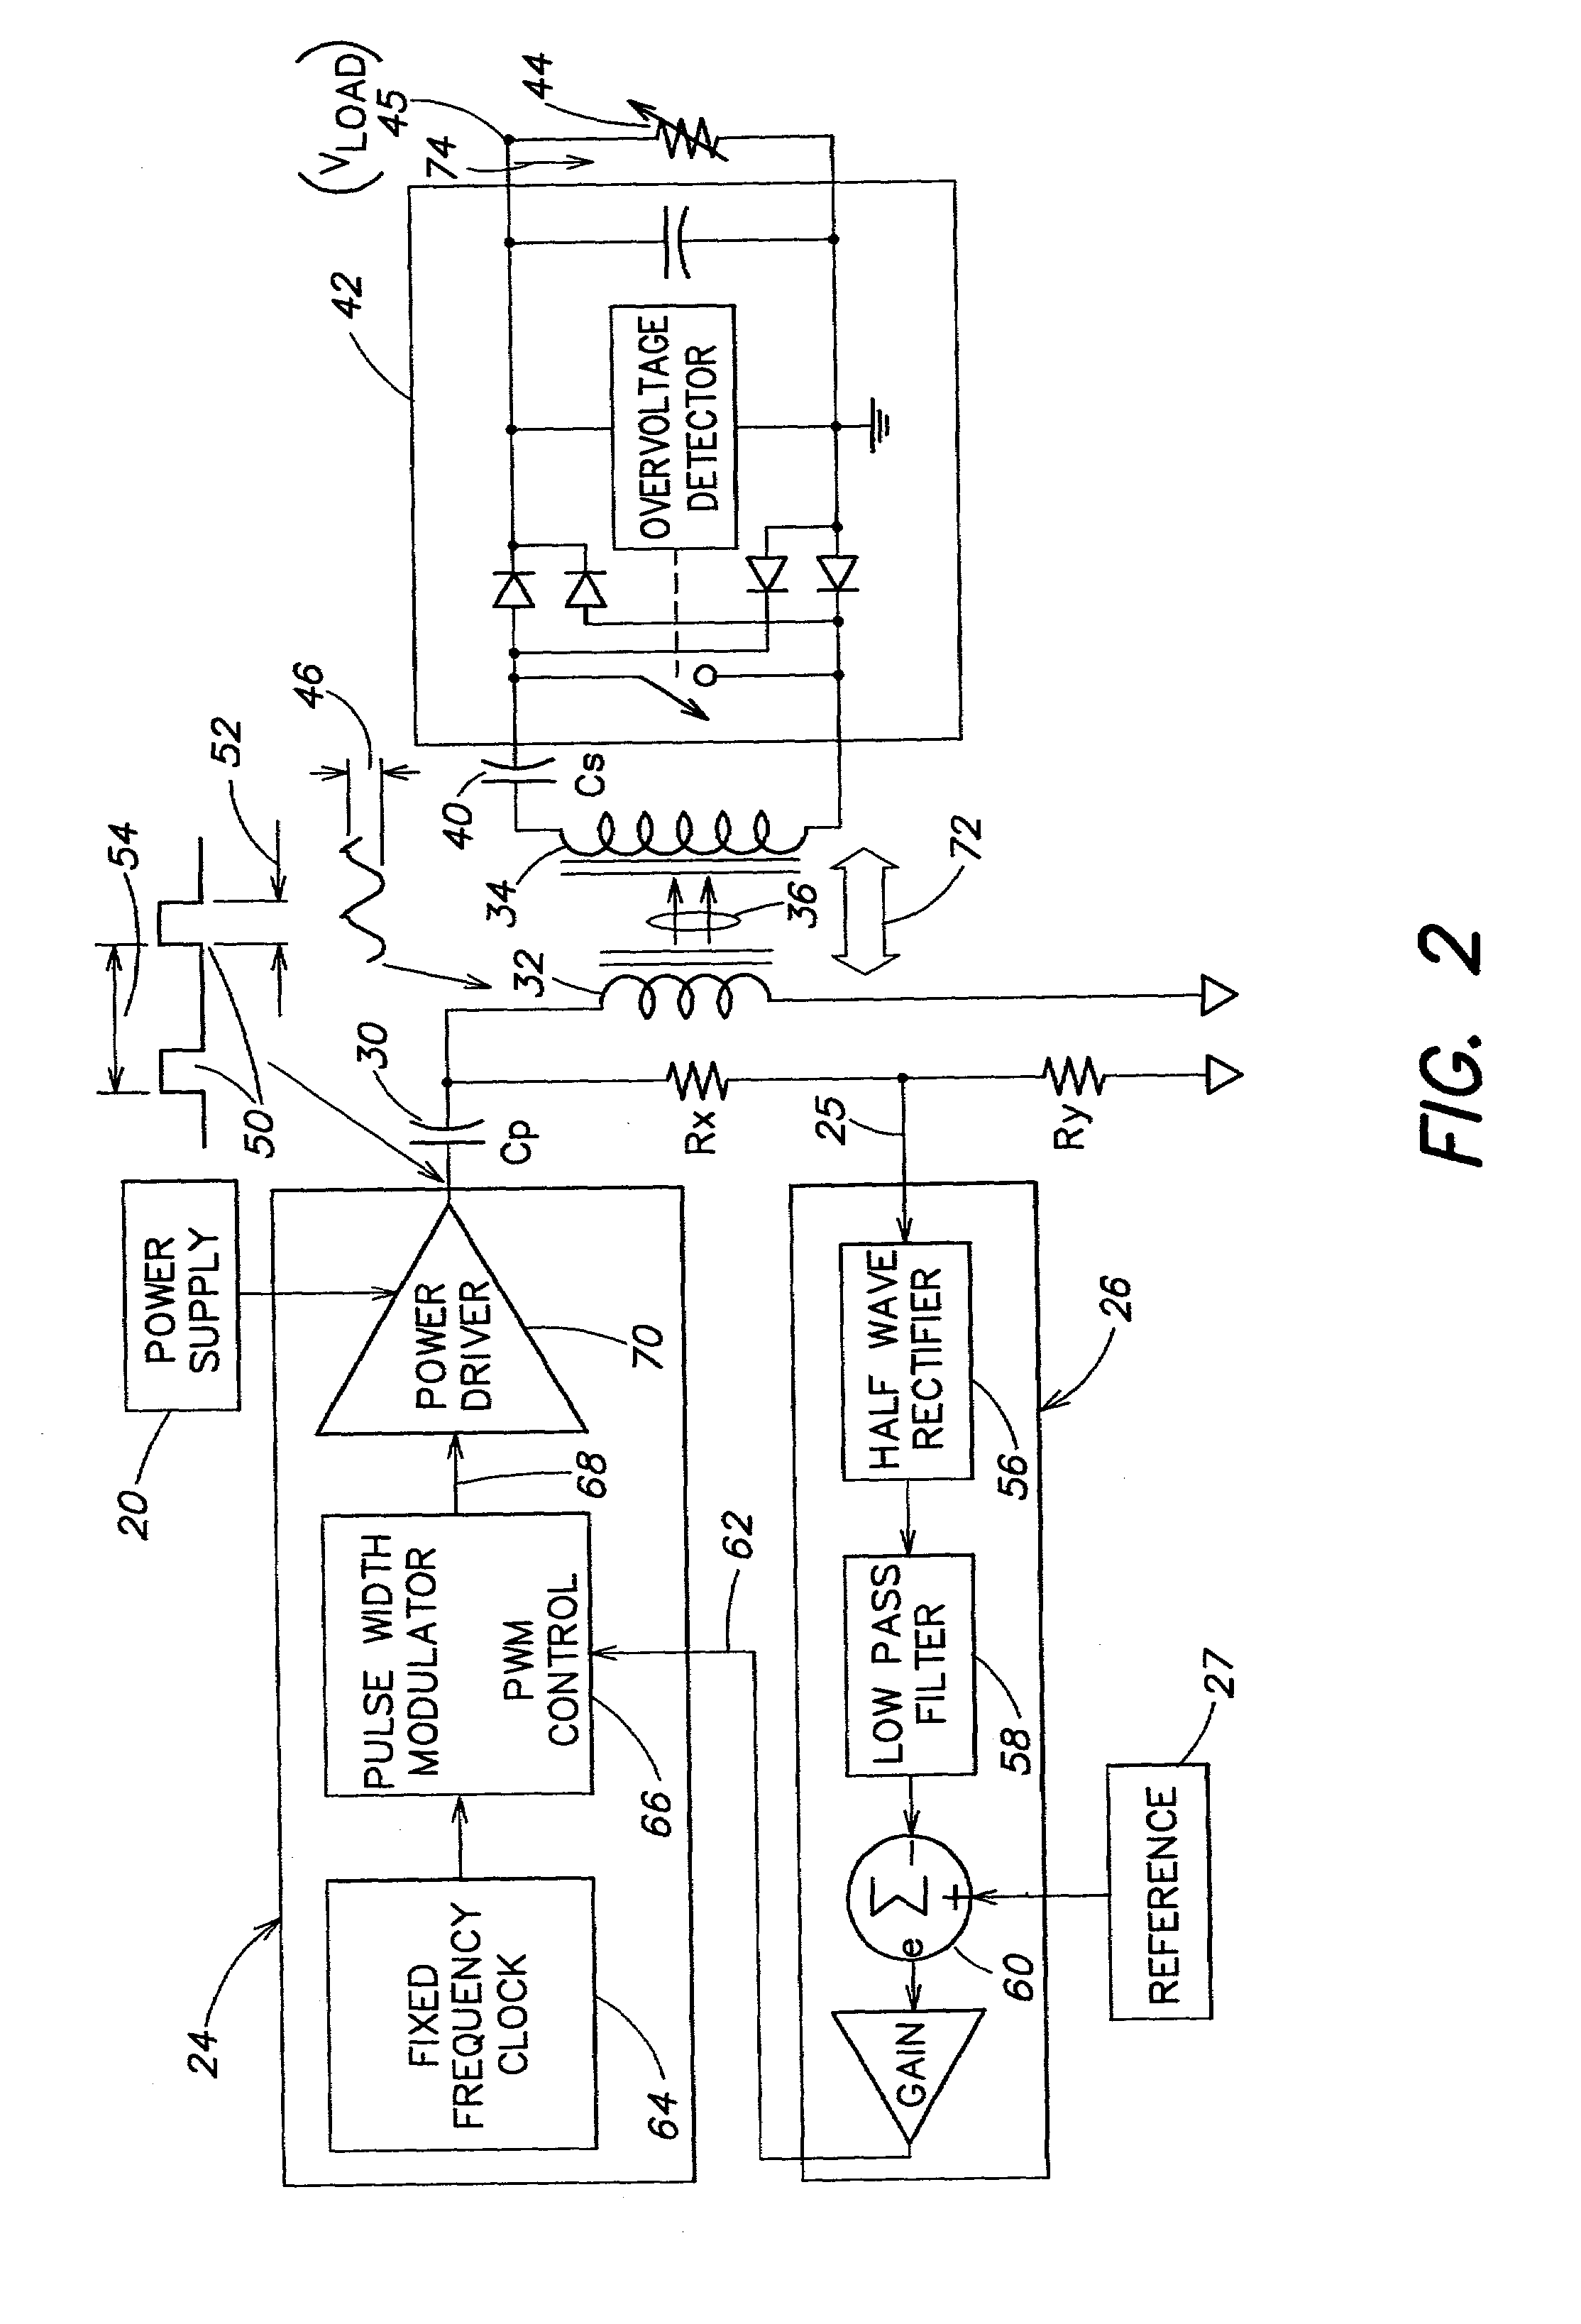 Methods and apparatus for providing a sufficiently stable power to a load in an energy transfer system